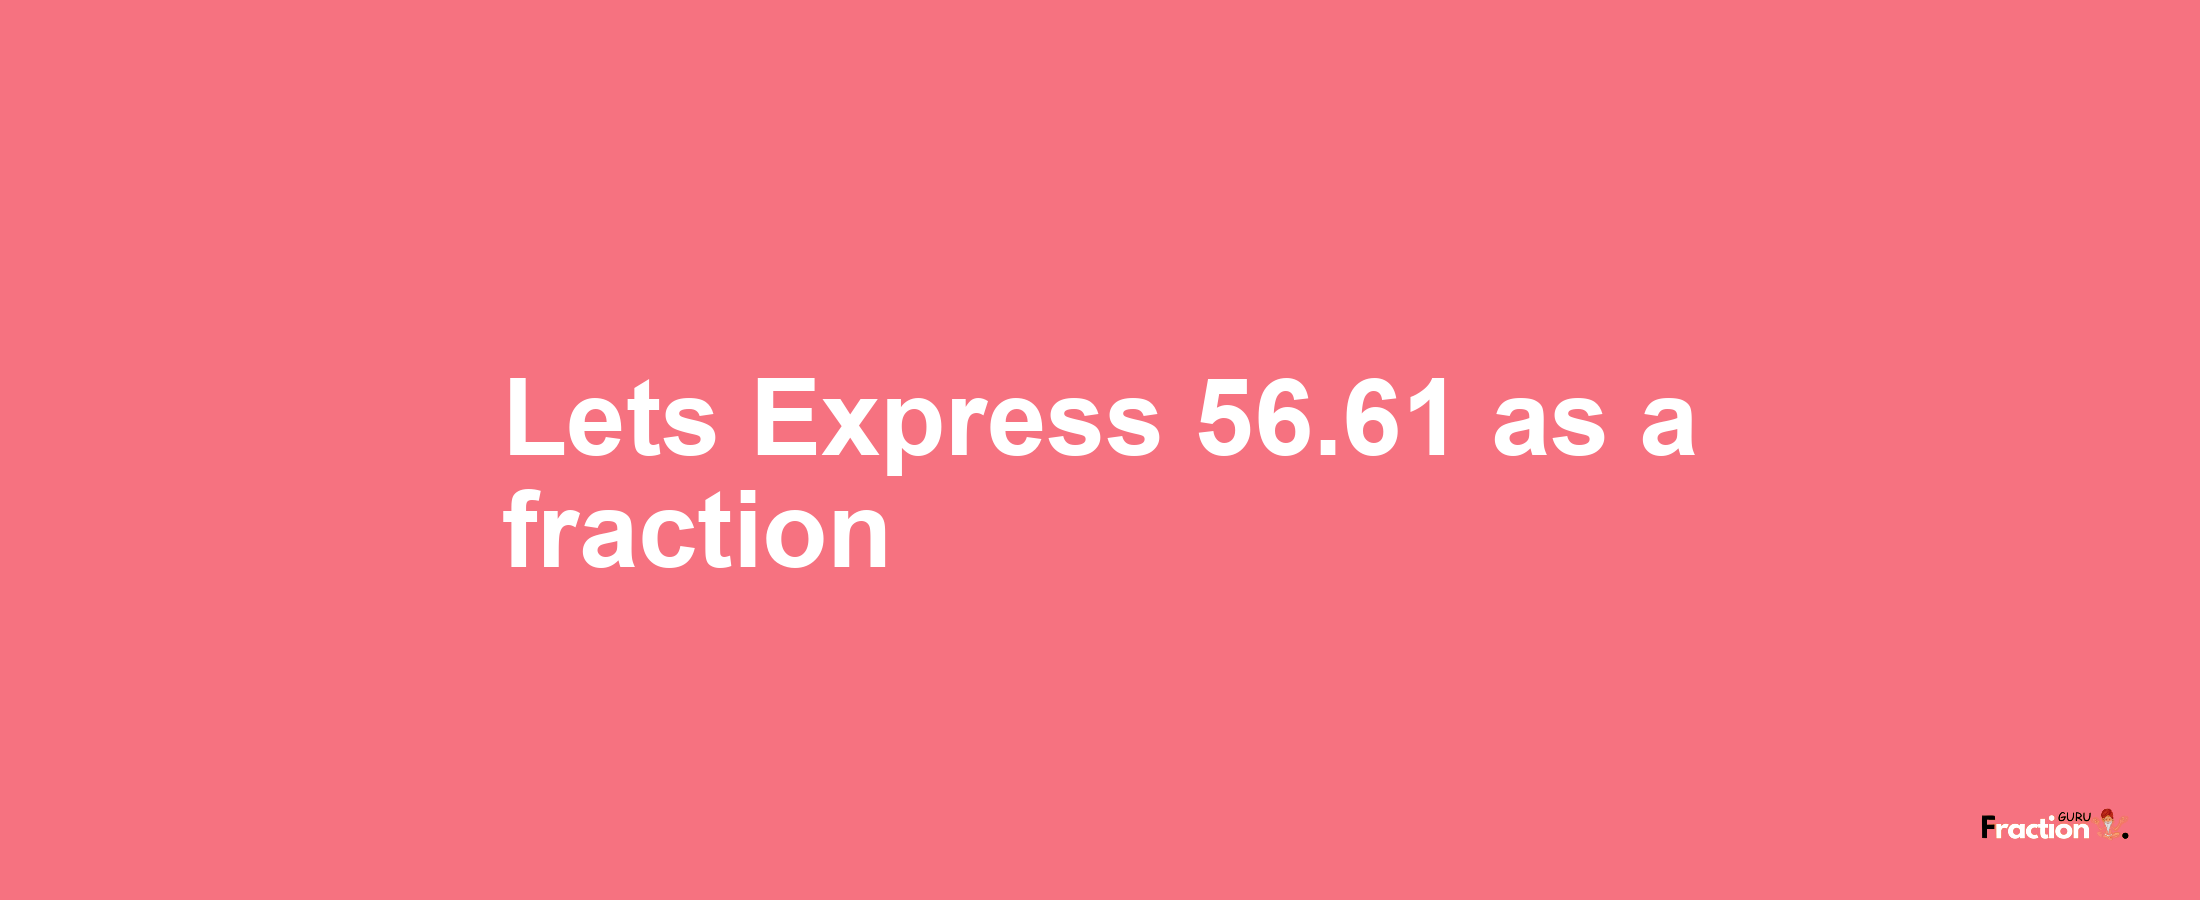 Lets Express 56.61 as afraction